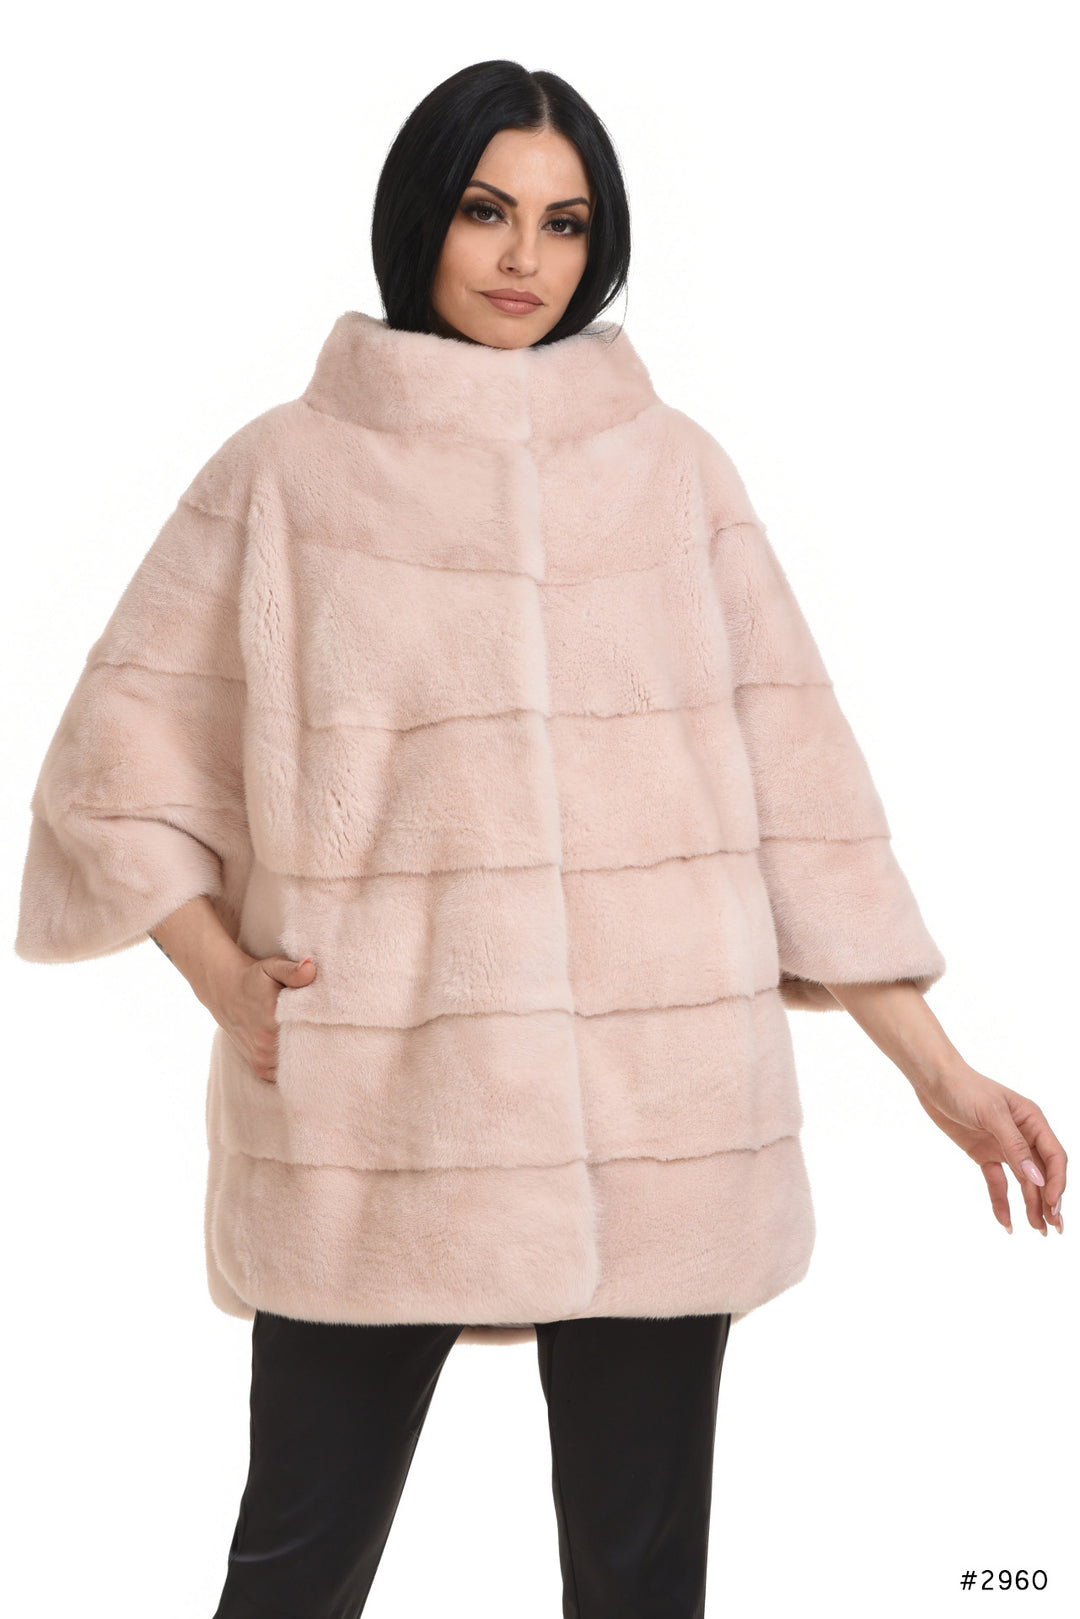 Oversize mink cape/jacket with stand up collar